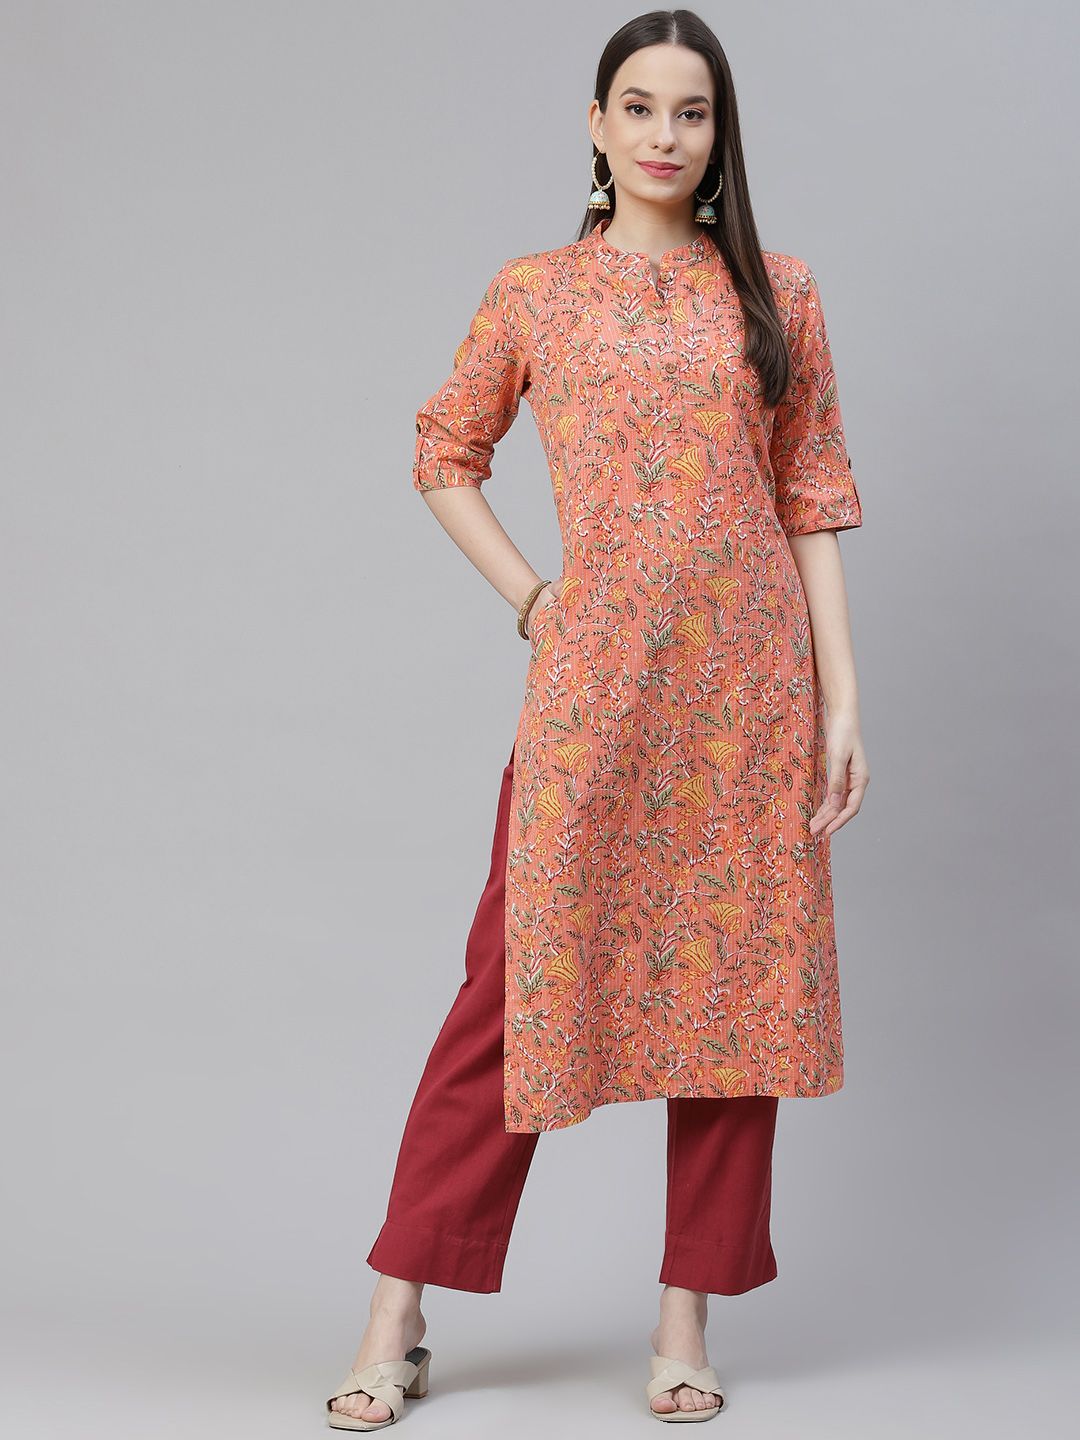 Divena Women Peach-Coloured & Yellow Floral Printed Floral Kurta Price in India